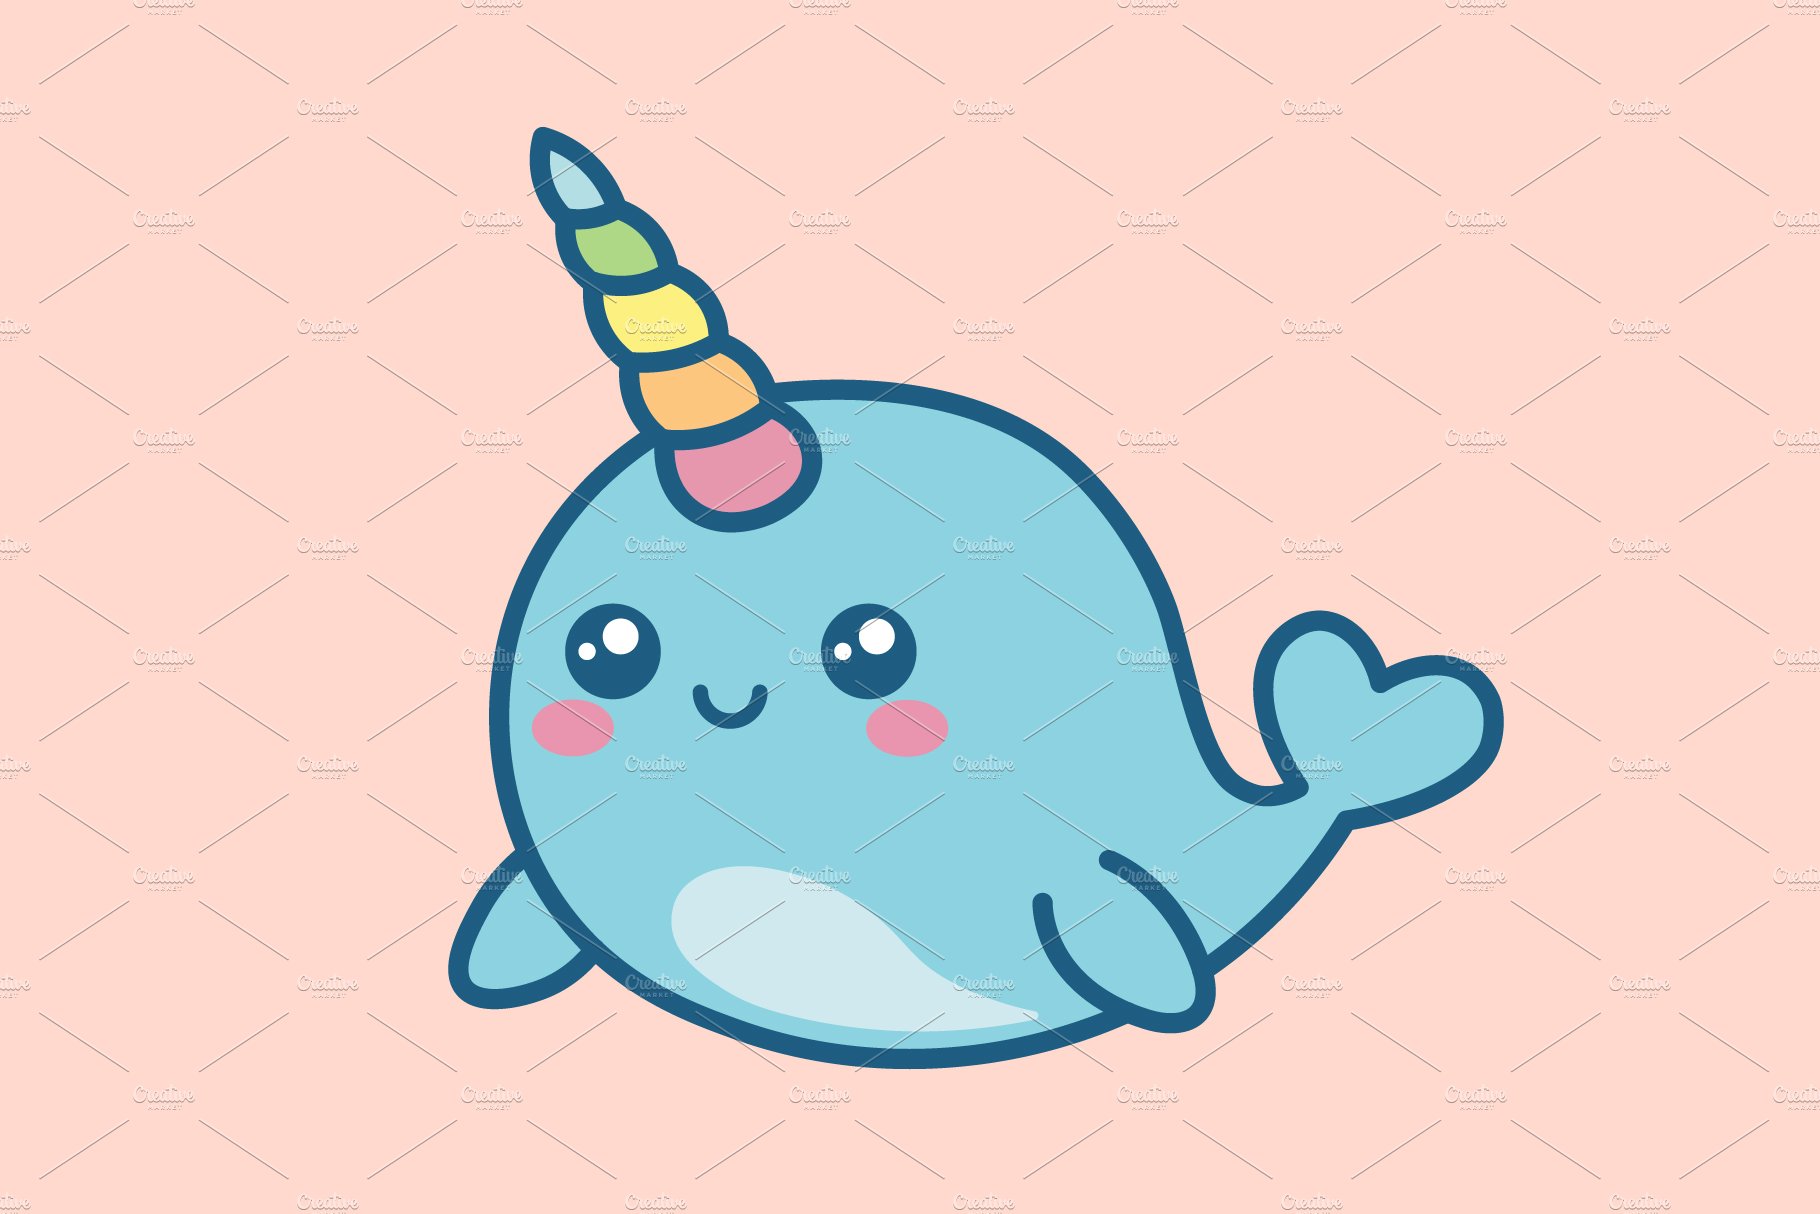 Narwhal cover image.